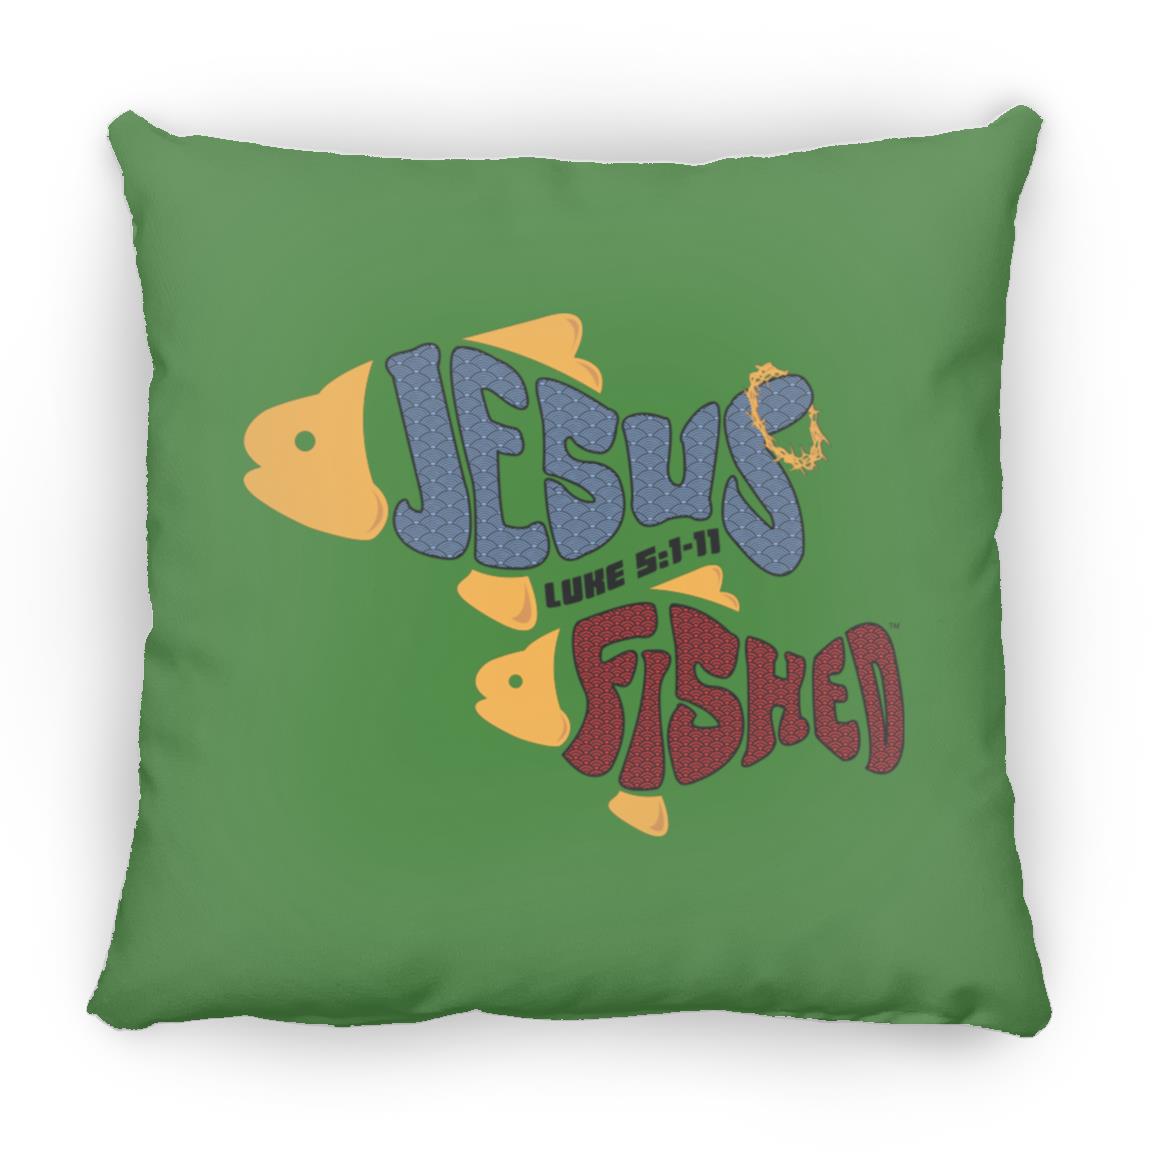 OneFish TwoFish Large Square Pillow